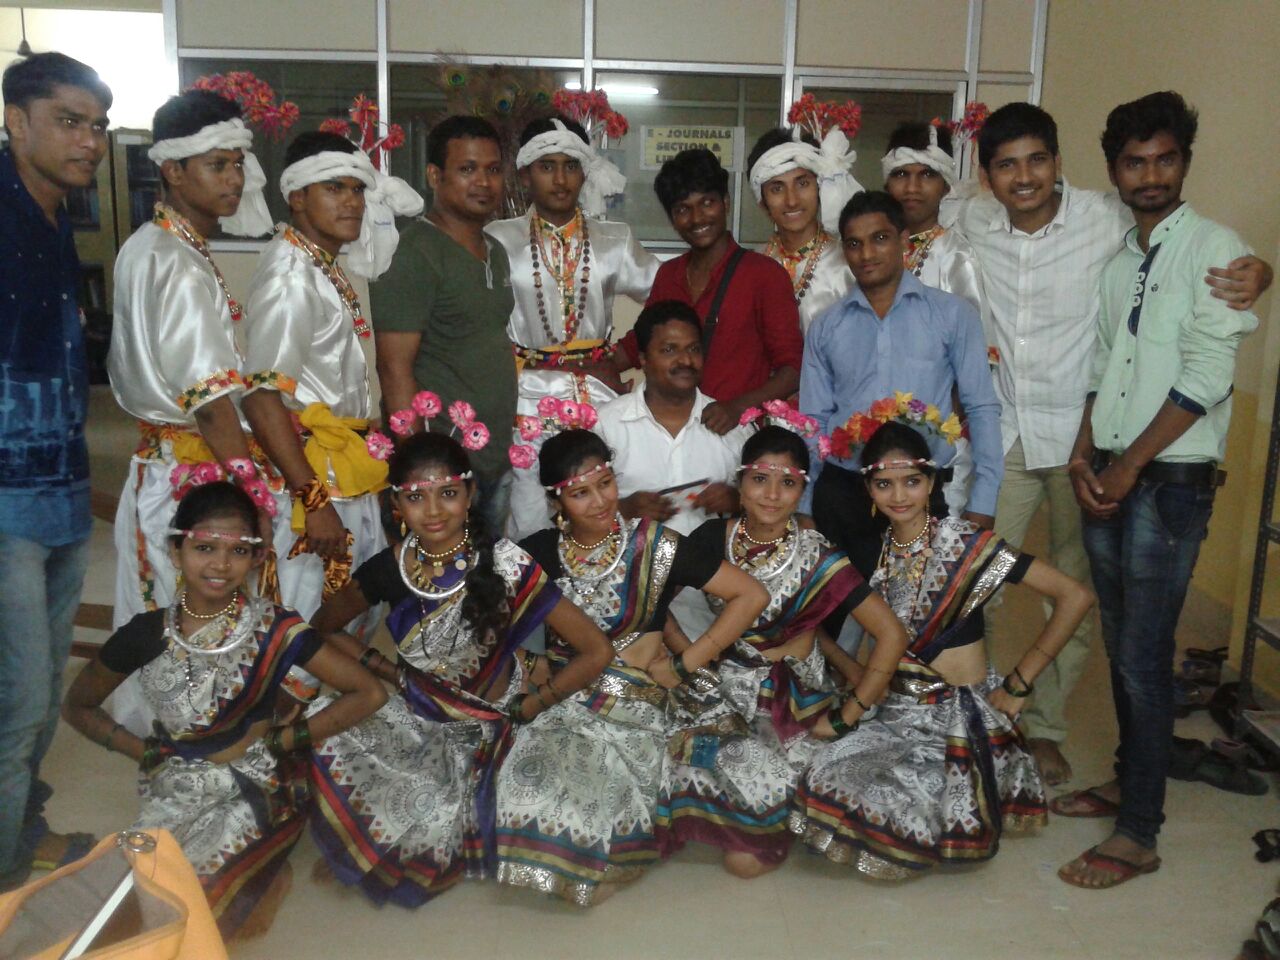 During Youth festival 29 July 2015 Regal Collage Karama dance